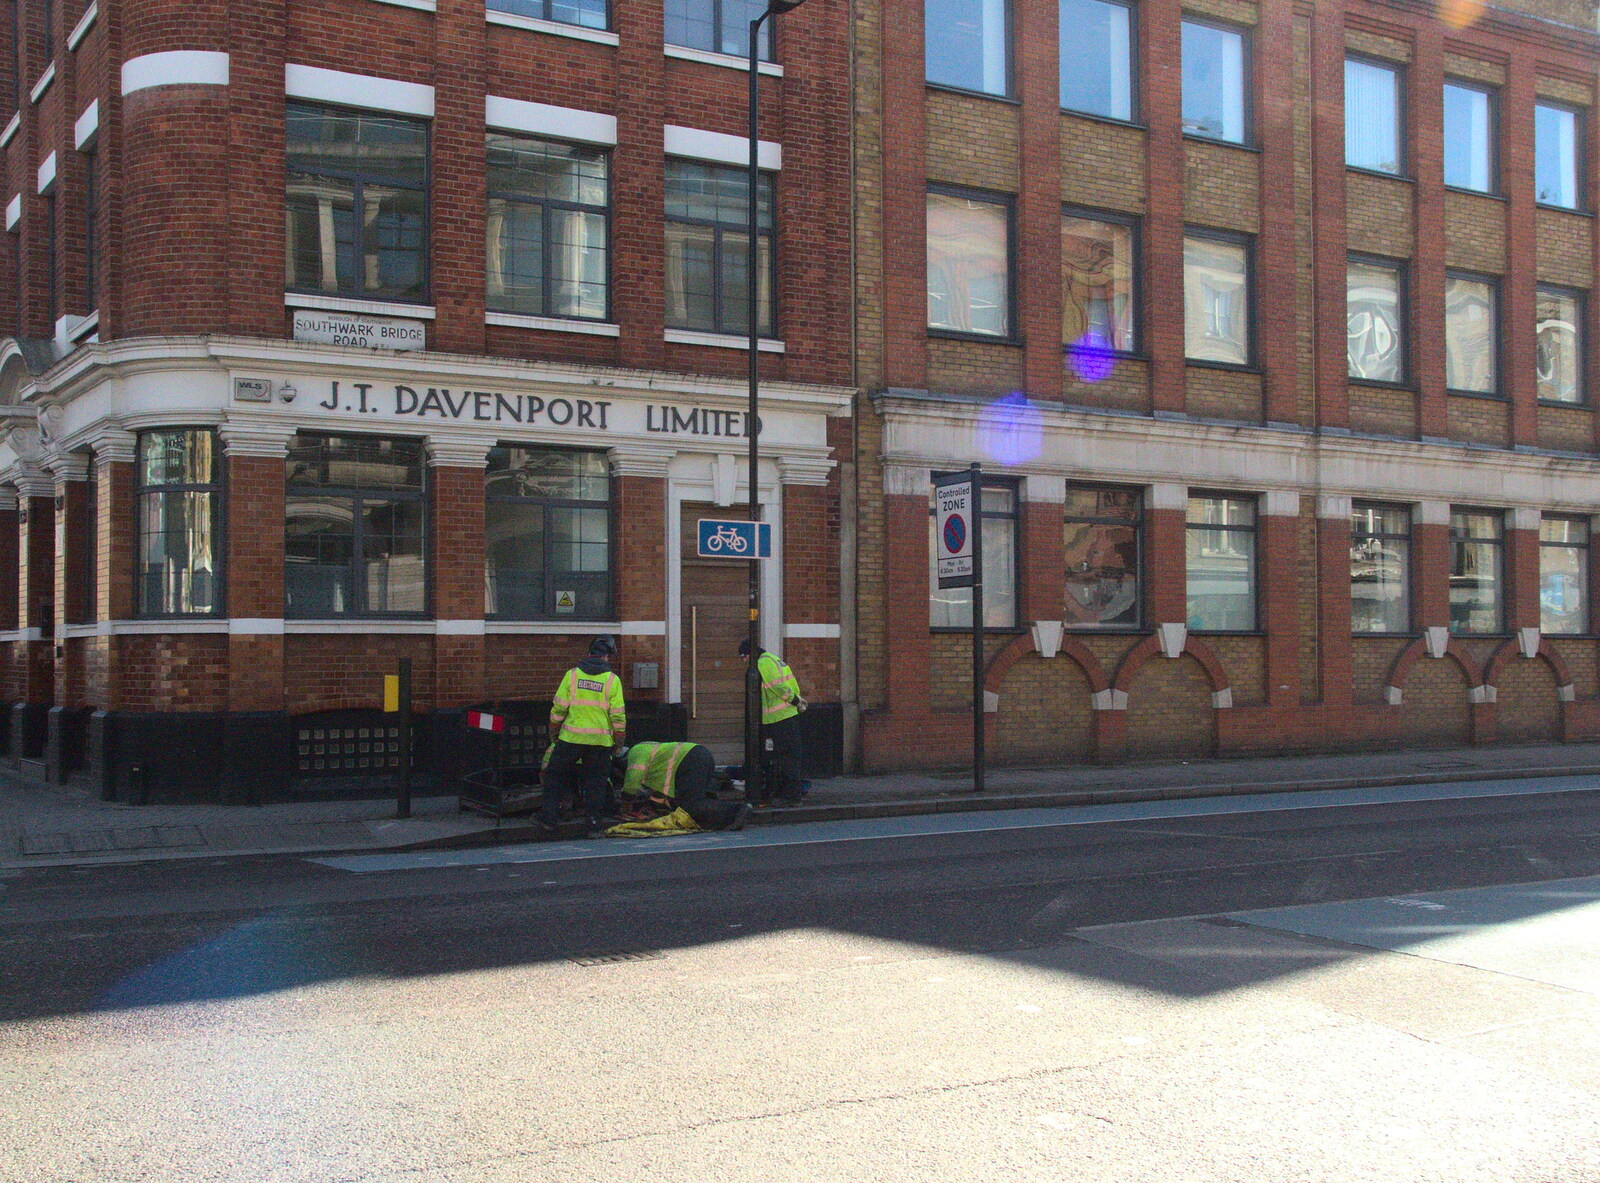 There's an electrical issue outside the office from A SwiftKey Power Cut, Southwark Bridge Road, London - 4th March 2016